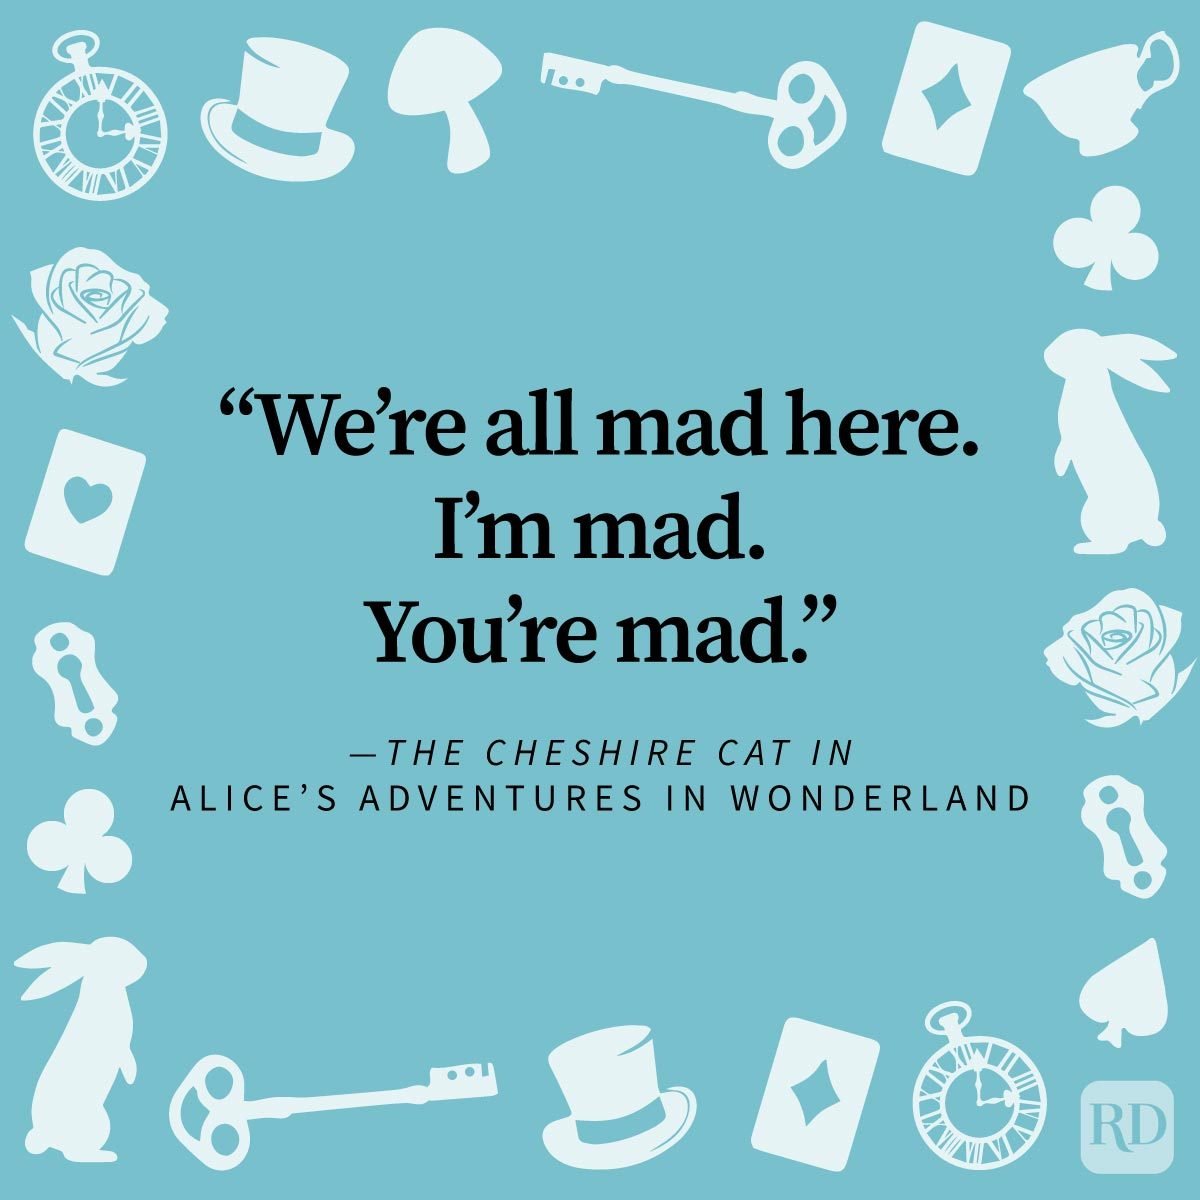 <p>The <a href="https://www.rd.com/list/classic-books/" rel="noopener noreferrer">timeless classic</a> <em>Alice's Adventures in Wonderland</em> offers bookworms of every age a whimsical escape from the ordinary. Lewis Carroll led readers headfirst into the topsy-turvy world of Wonderland, a place where logic takes a backseat and the laws of reality are merely suggestions. Whether you're a seasoned wanderer of Wonderland or a curious newcomer, you'll find something undeniably magical within the pages of this story. It's why <em>Alice in Wonderland</em> quotes are so enduring.</p> <p><a href="https://www.rd.com/list/quotes-from-books/" rel="noopener noreferrer">Book quotes</a> are one of the ways I love to quickly re-immerse myself in the whimsy of my <a href="https://www.rd.com/list/books-read-before-die/" rel="noopener noreferrer">favorite books</a>. To give you a quick <em>Alice</em> fix, I've collected dozens of <em>Alice in Wonderland</em> quotes from the original book and its sequel, <em>Through the Looking-Glass</em>. I've also thrown in some quotes from the film adaptations, which are as wonderfully weird as their source material. Grab your teacup, put on your most eccentric hat and prepare for a journey as we explore the profound and peculiar words of Carroll's masterpiece.</p> <p class="p1"><b>Get <i>Reader’s Digest</i>’s </b><a href="https://www.rd.com/newsletter/?int_source=direct&int_medium=rd.com&int_campaign=nlrda_20221001_topperformingcontentnlsignup&int_placement=incontent"><span><b>Read Up newsletter</b></span></a><b> for more quotes, books, humor, cleaning, travel, tech and fun facts all week long.<br> </b></p>